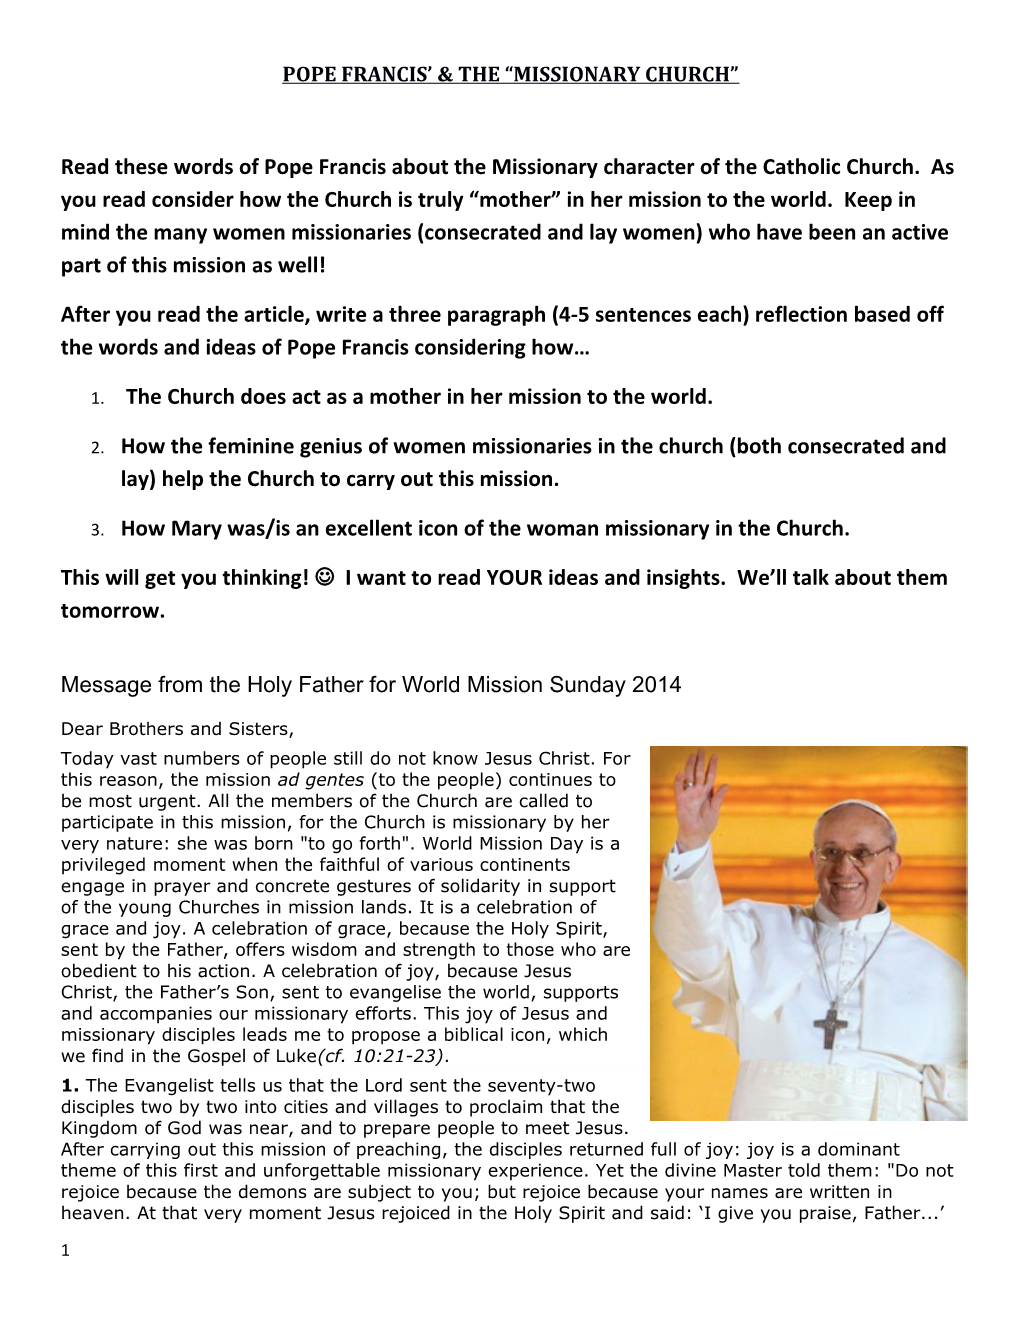 Pope Francis & the Missionary Church